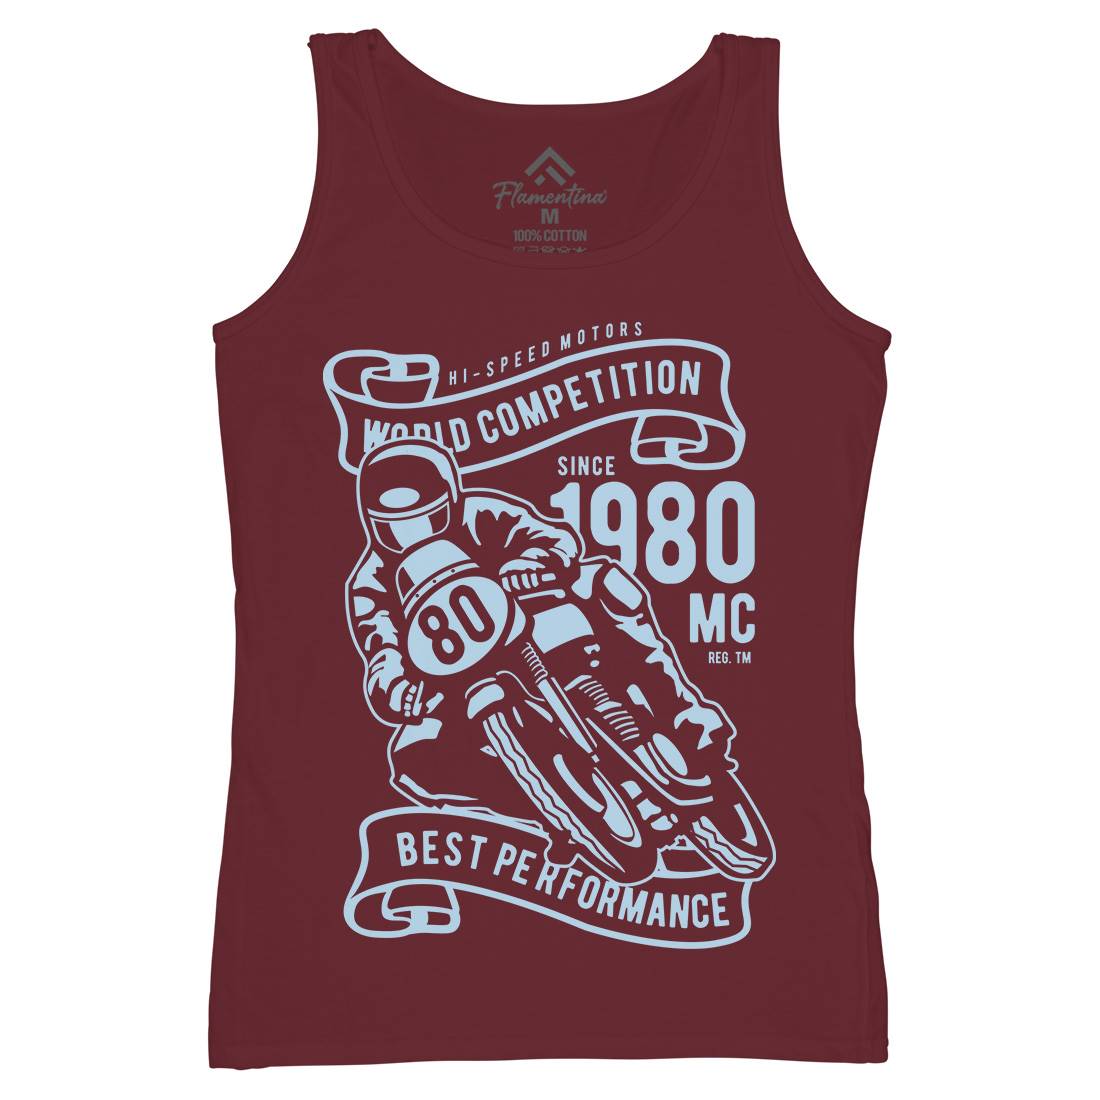 World Competition Superbike Womens Organic Tank Top Vest Motorcycles B477